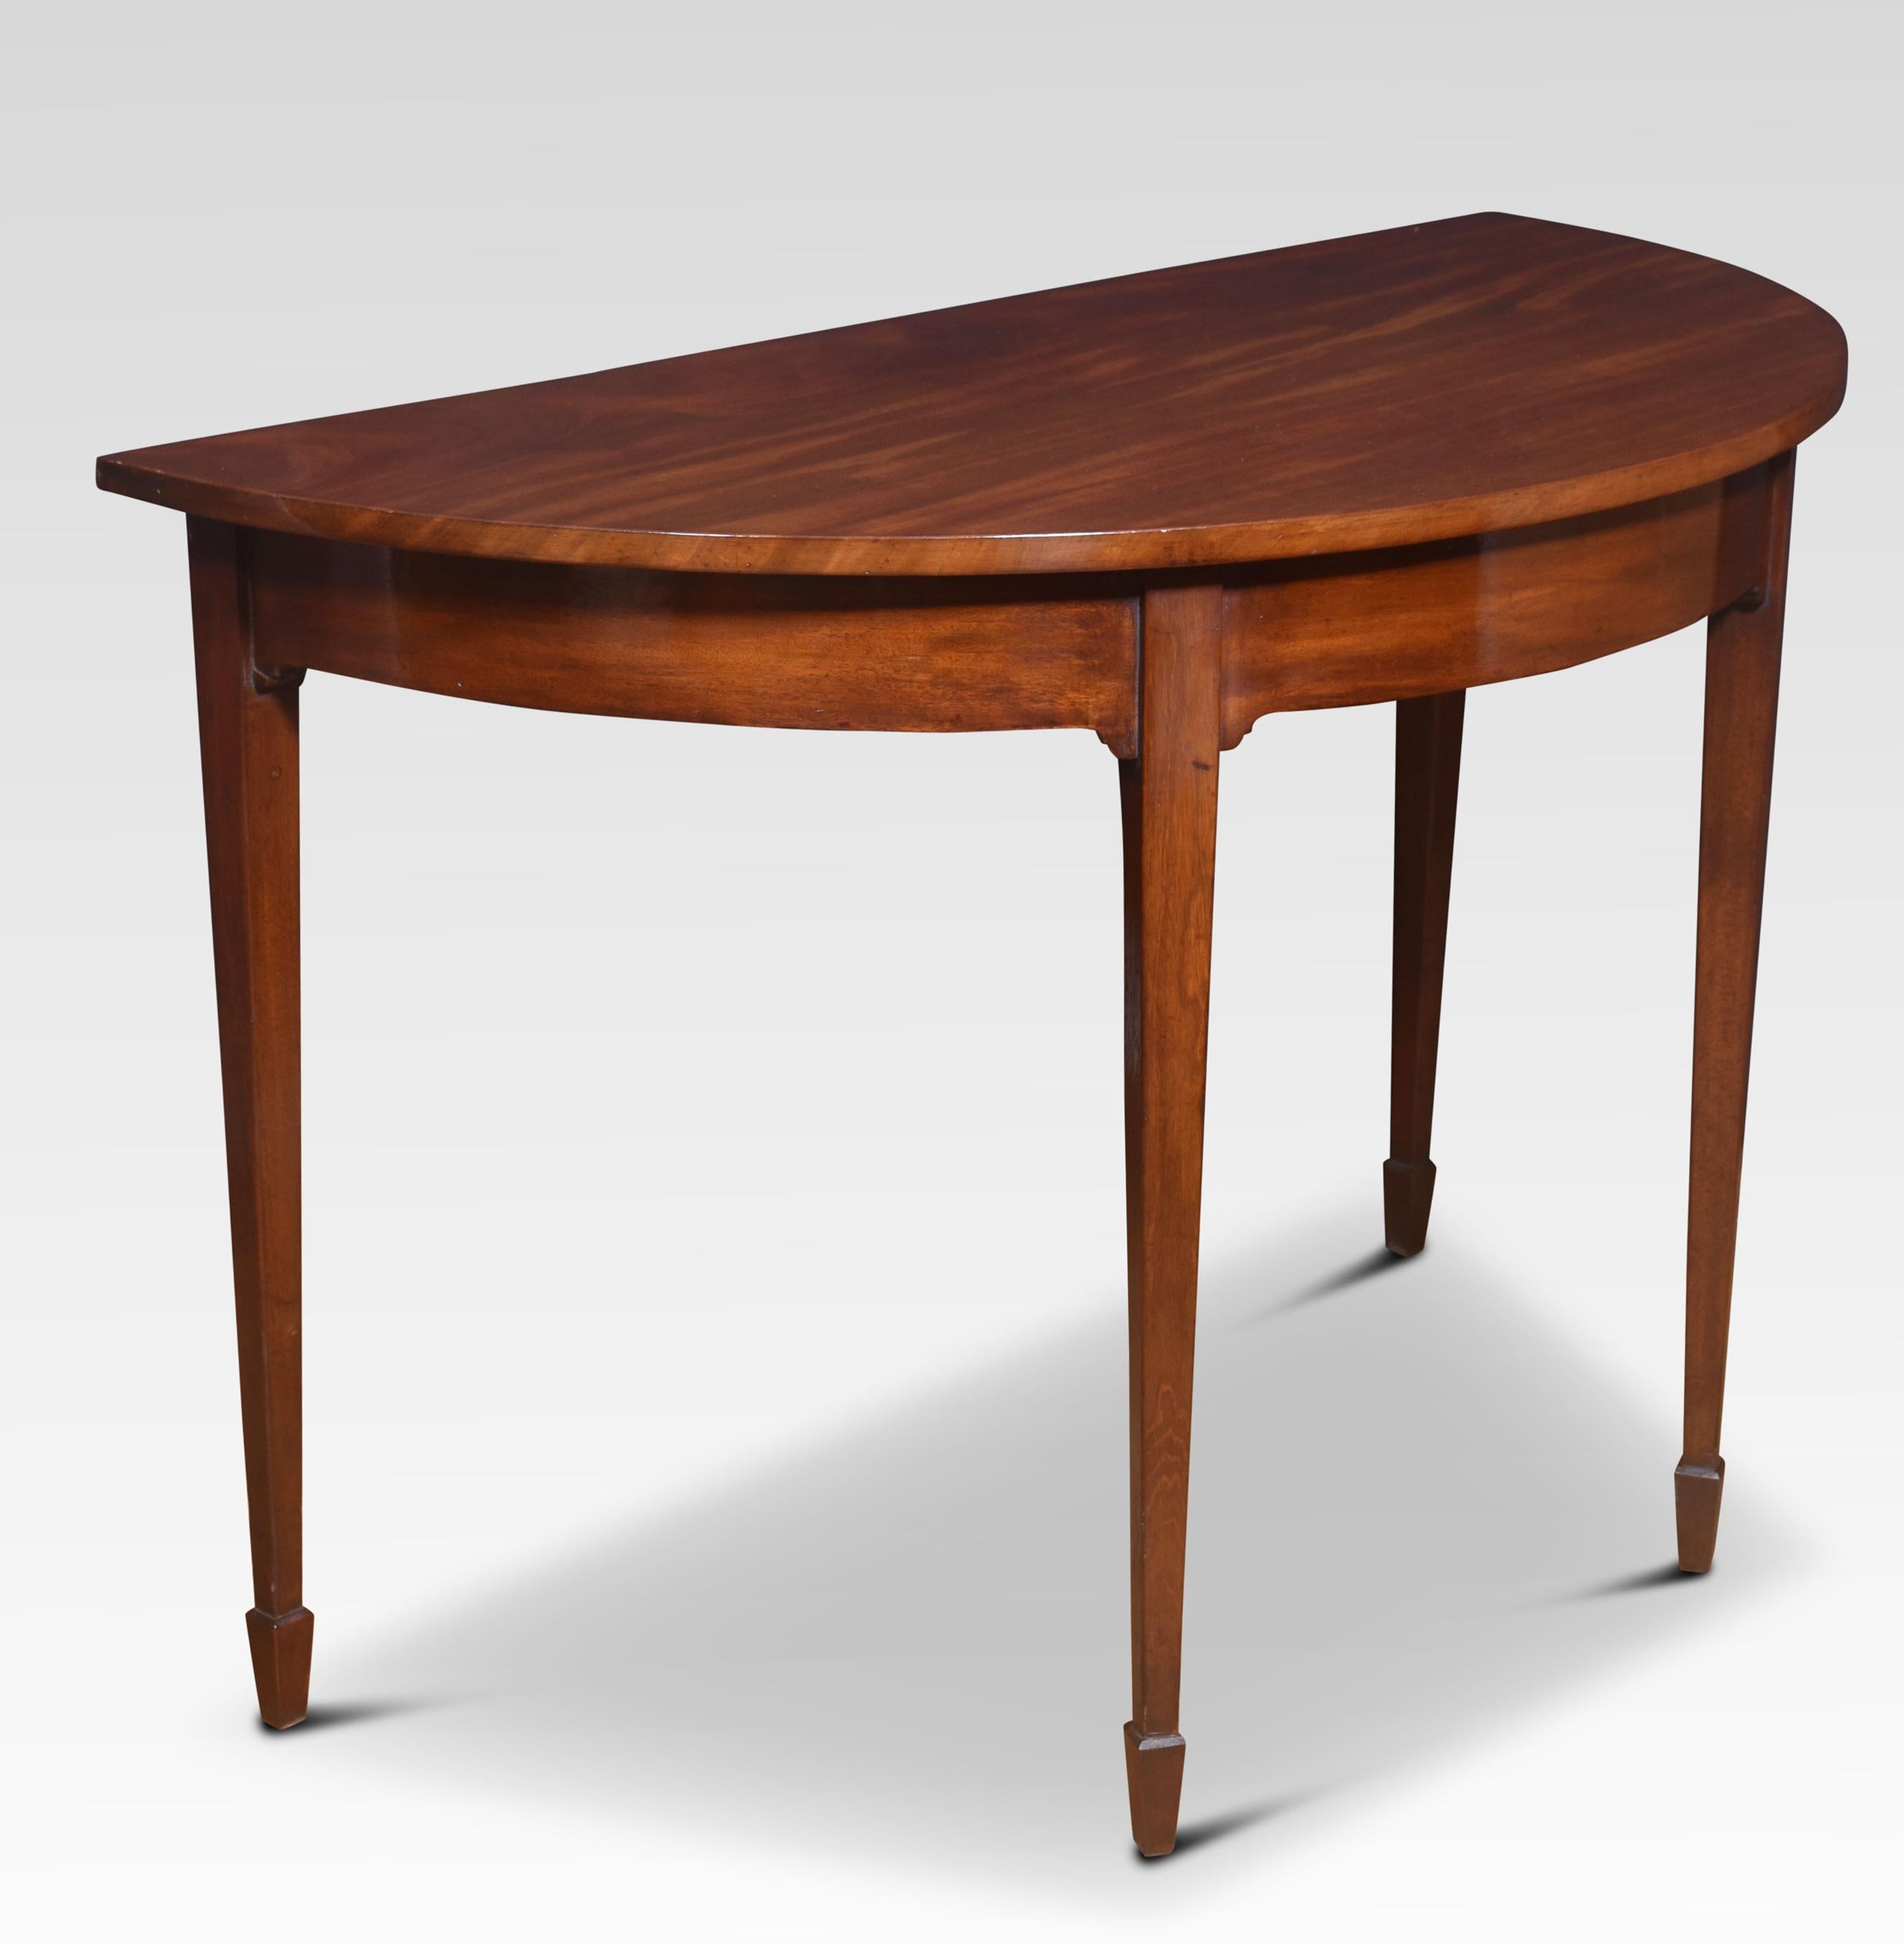 Pair of hall tables the well-figured half-round mahogany tops to the moulded freeze all raised on tapering legs, terminating in spade feet.
Dimensions
Height 31.5 Inches
Width 48.5 Inches
Depth 24 Inches